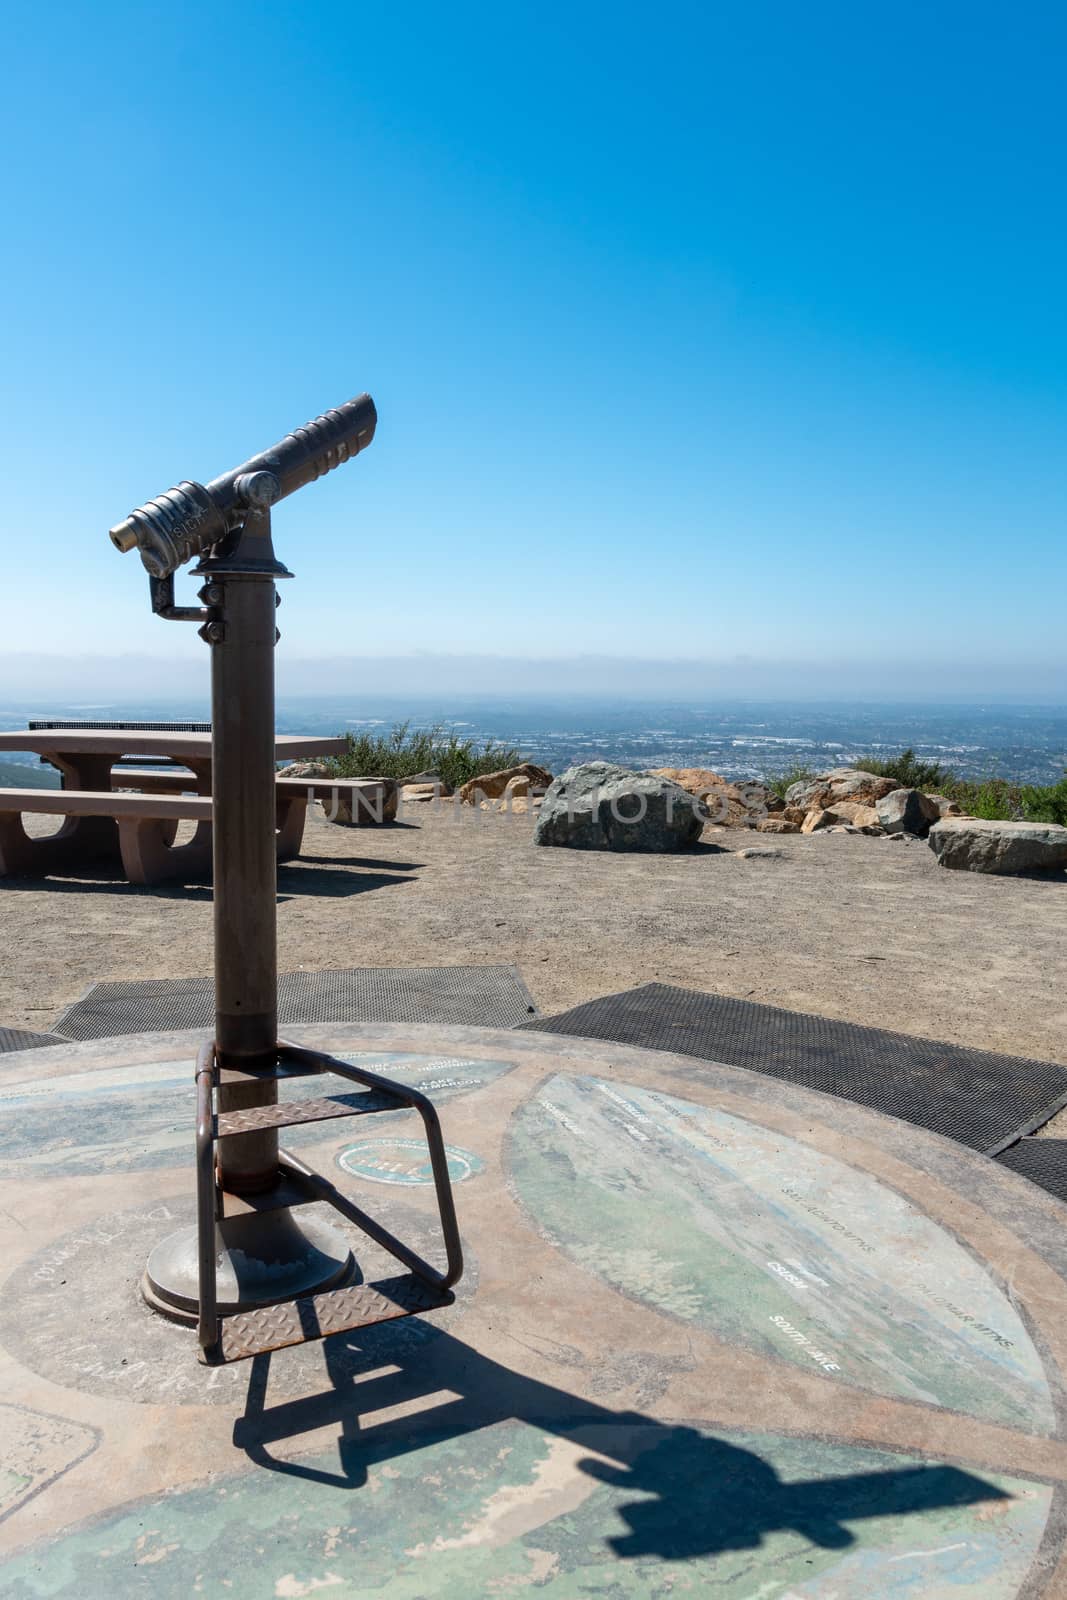 Telescope on the summit of the Double Peak Park in San Marcos. 200 acre park featuring a play area and hiking trails that lead to a summit.